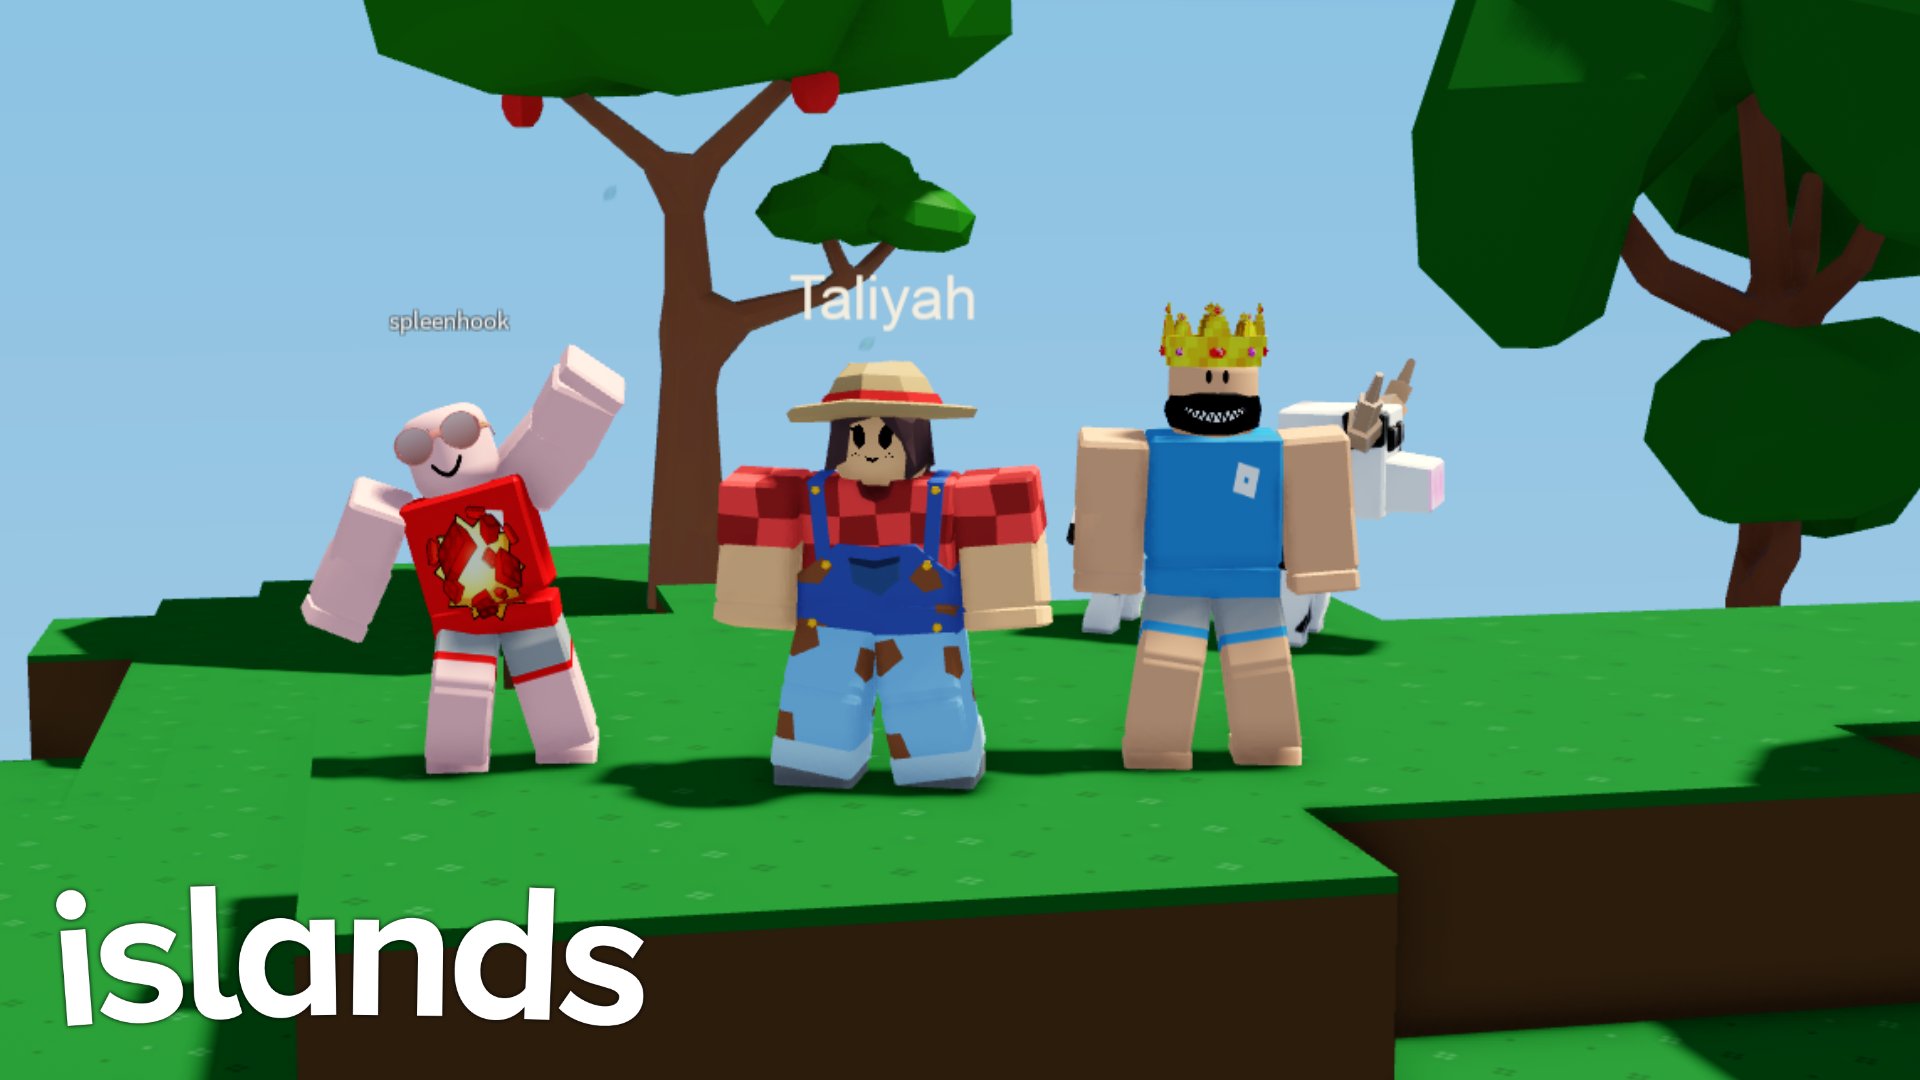 Roblox Islands was created one year ago! Thank you for all the support along the way